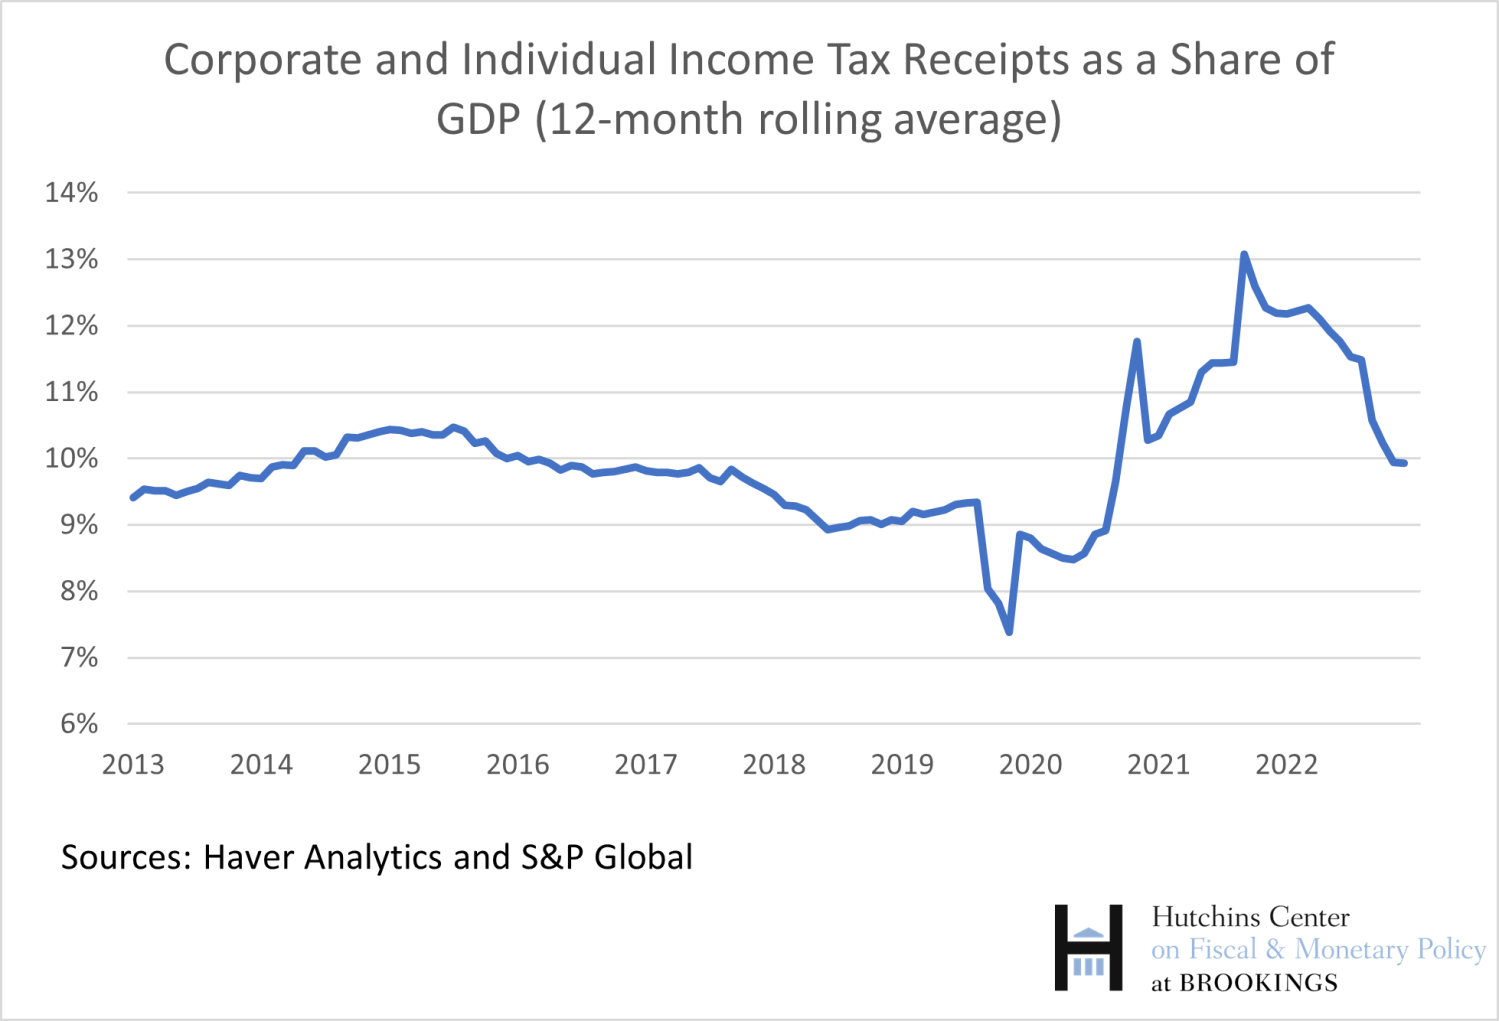 Corporate and Individual Income Tax Receipts as a Share of GDP (12-month rolling average)